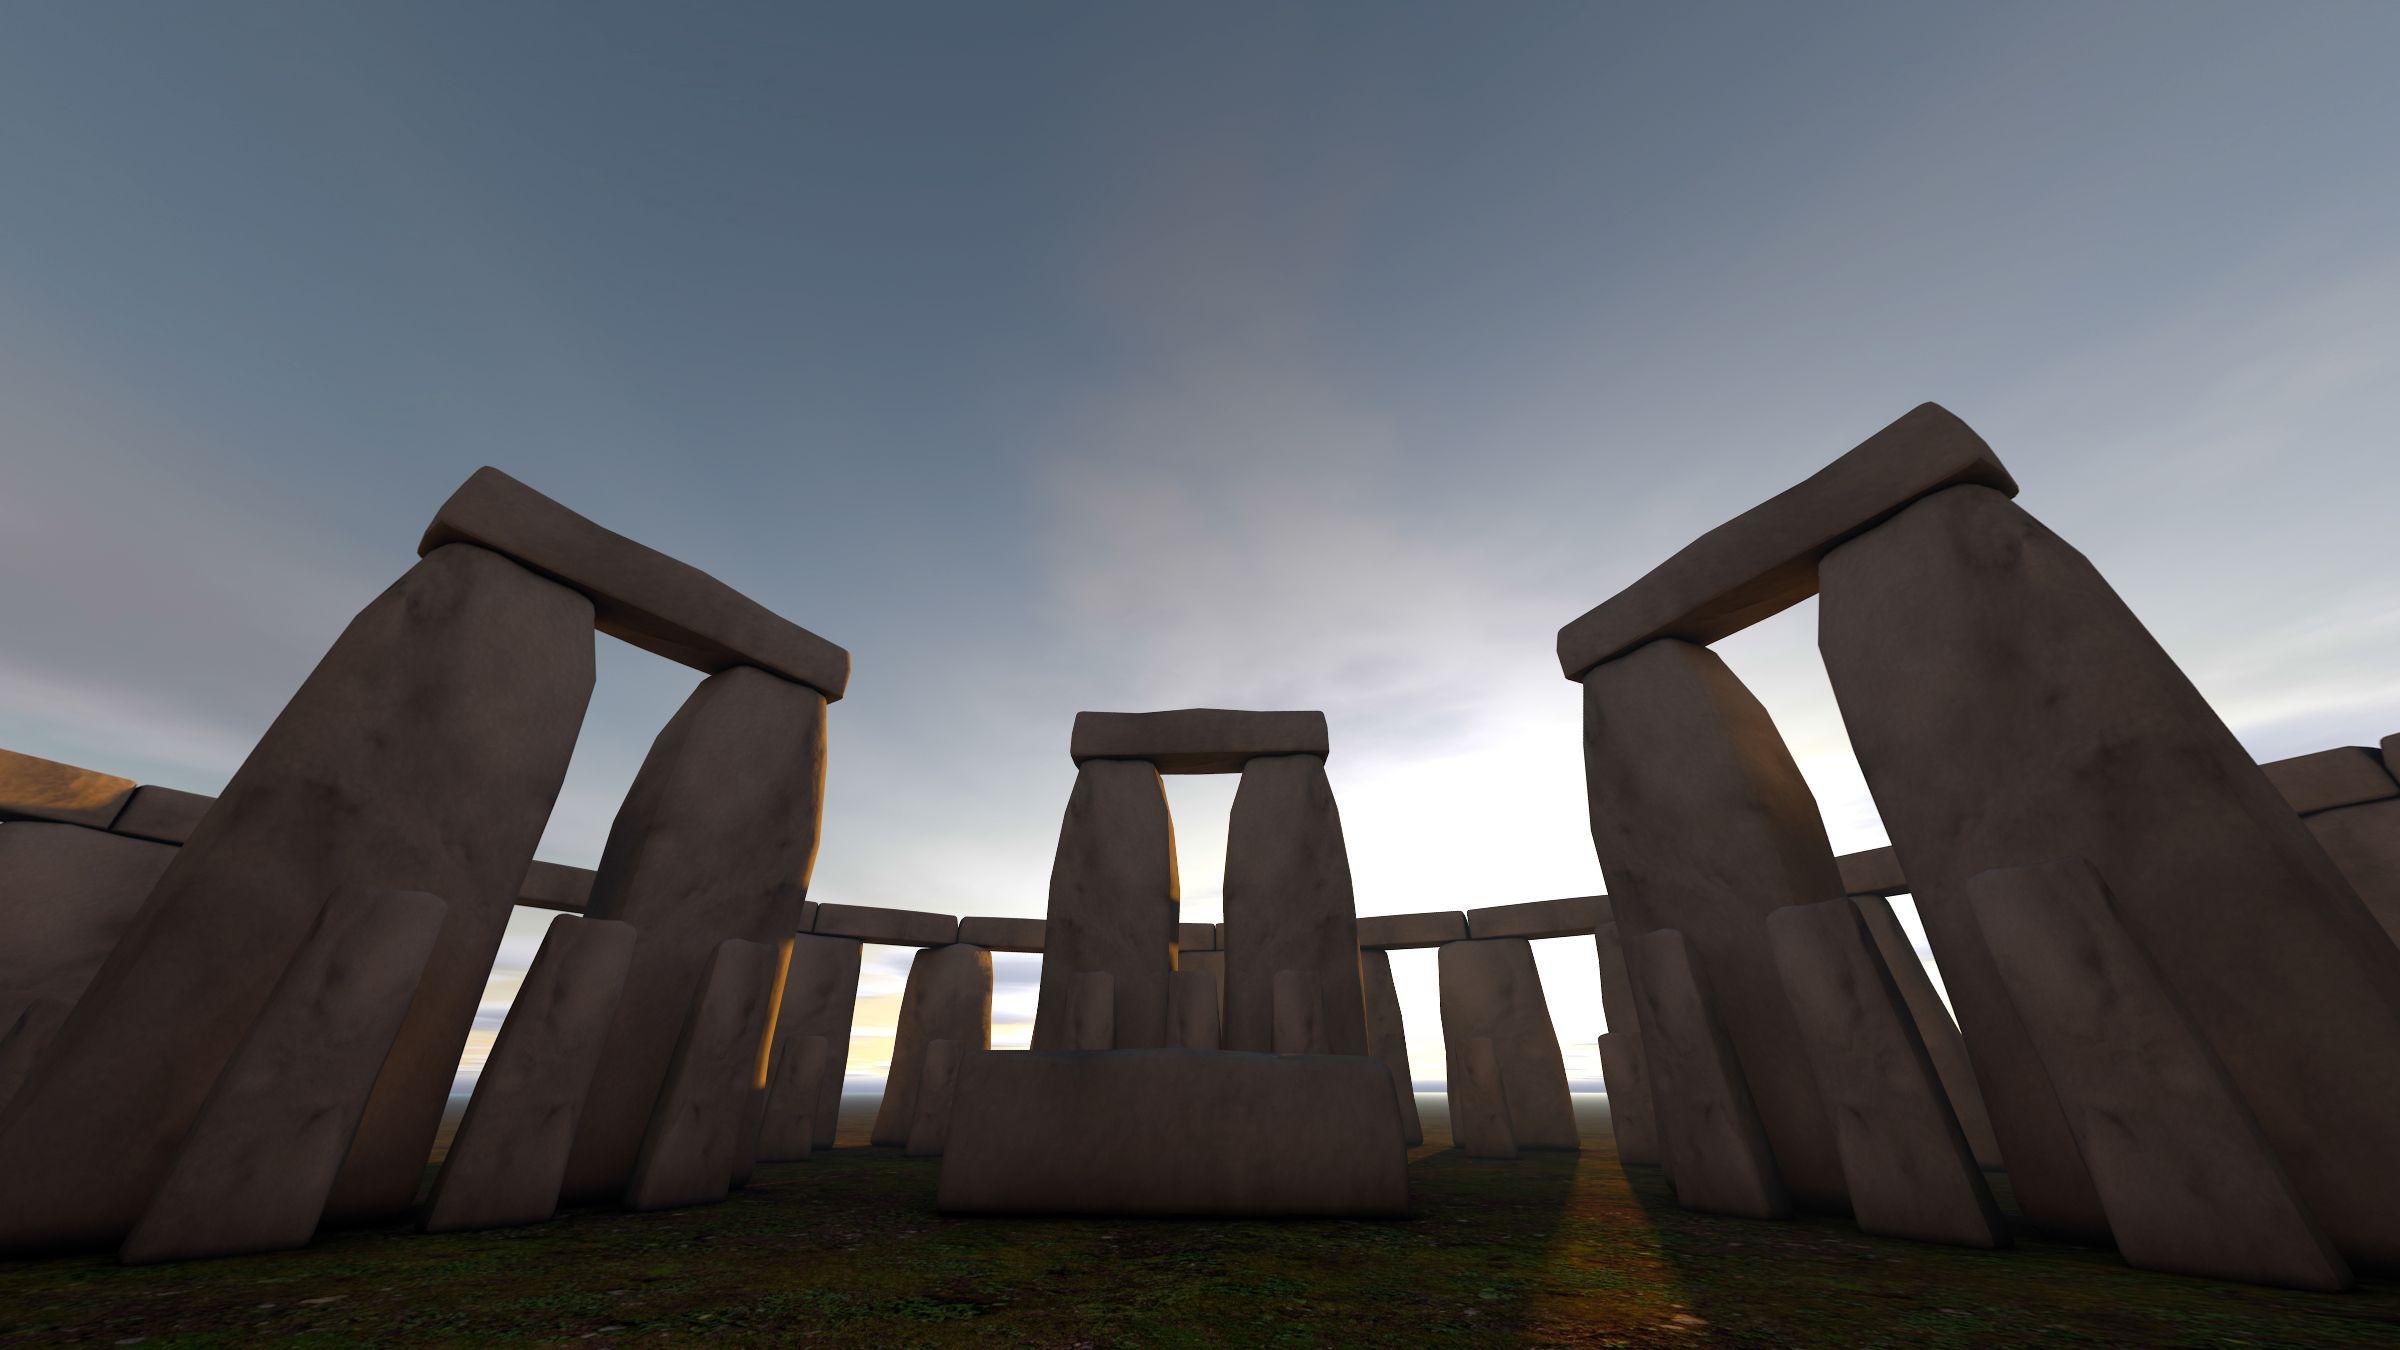 The Hong Kong Space Museum will screen a new sky show, "The Sun, Our Living Star", at its Space Theatre from tomorrow (May 1) and highlight the close relationship between the sun and humans. Picture shows the Stonehenge site in England, which appears custom built for astronomy and marking the sun's annual movements across the sky. (Source of photo: European Southern Observatory)